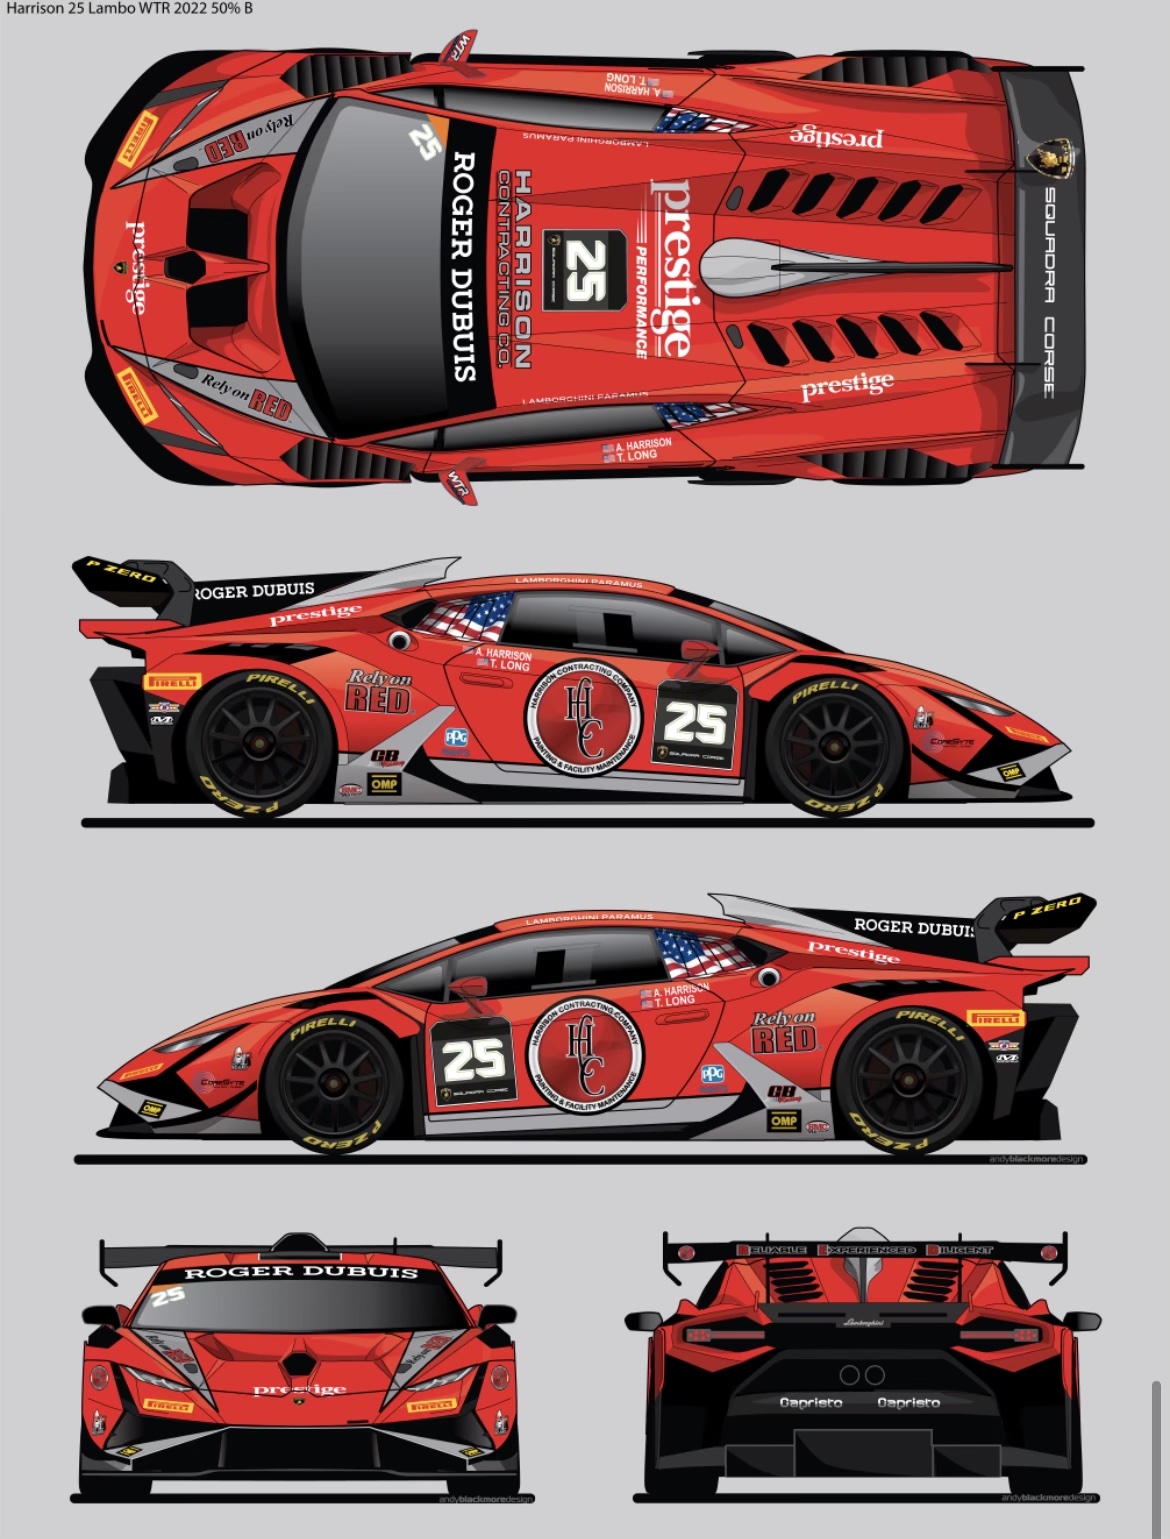 Here's the rendering of how our Lamborghini will look when it debuts at Laguna Seca!